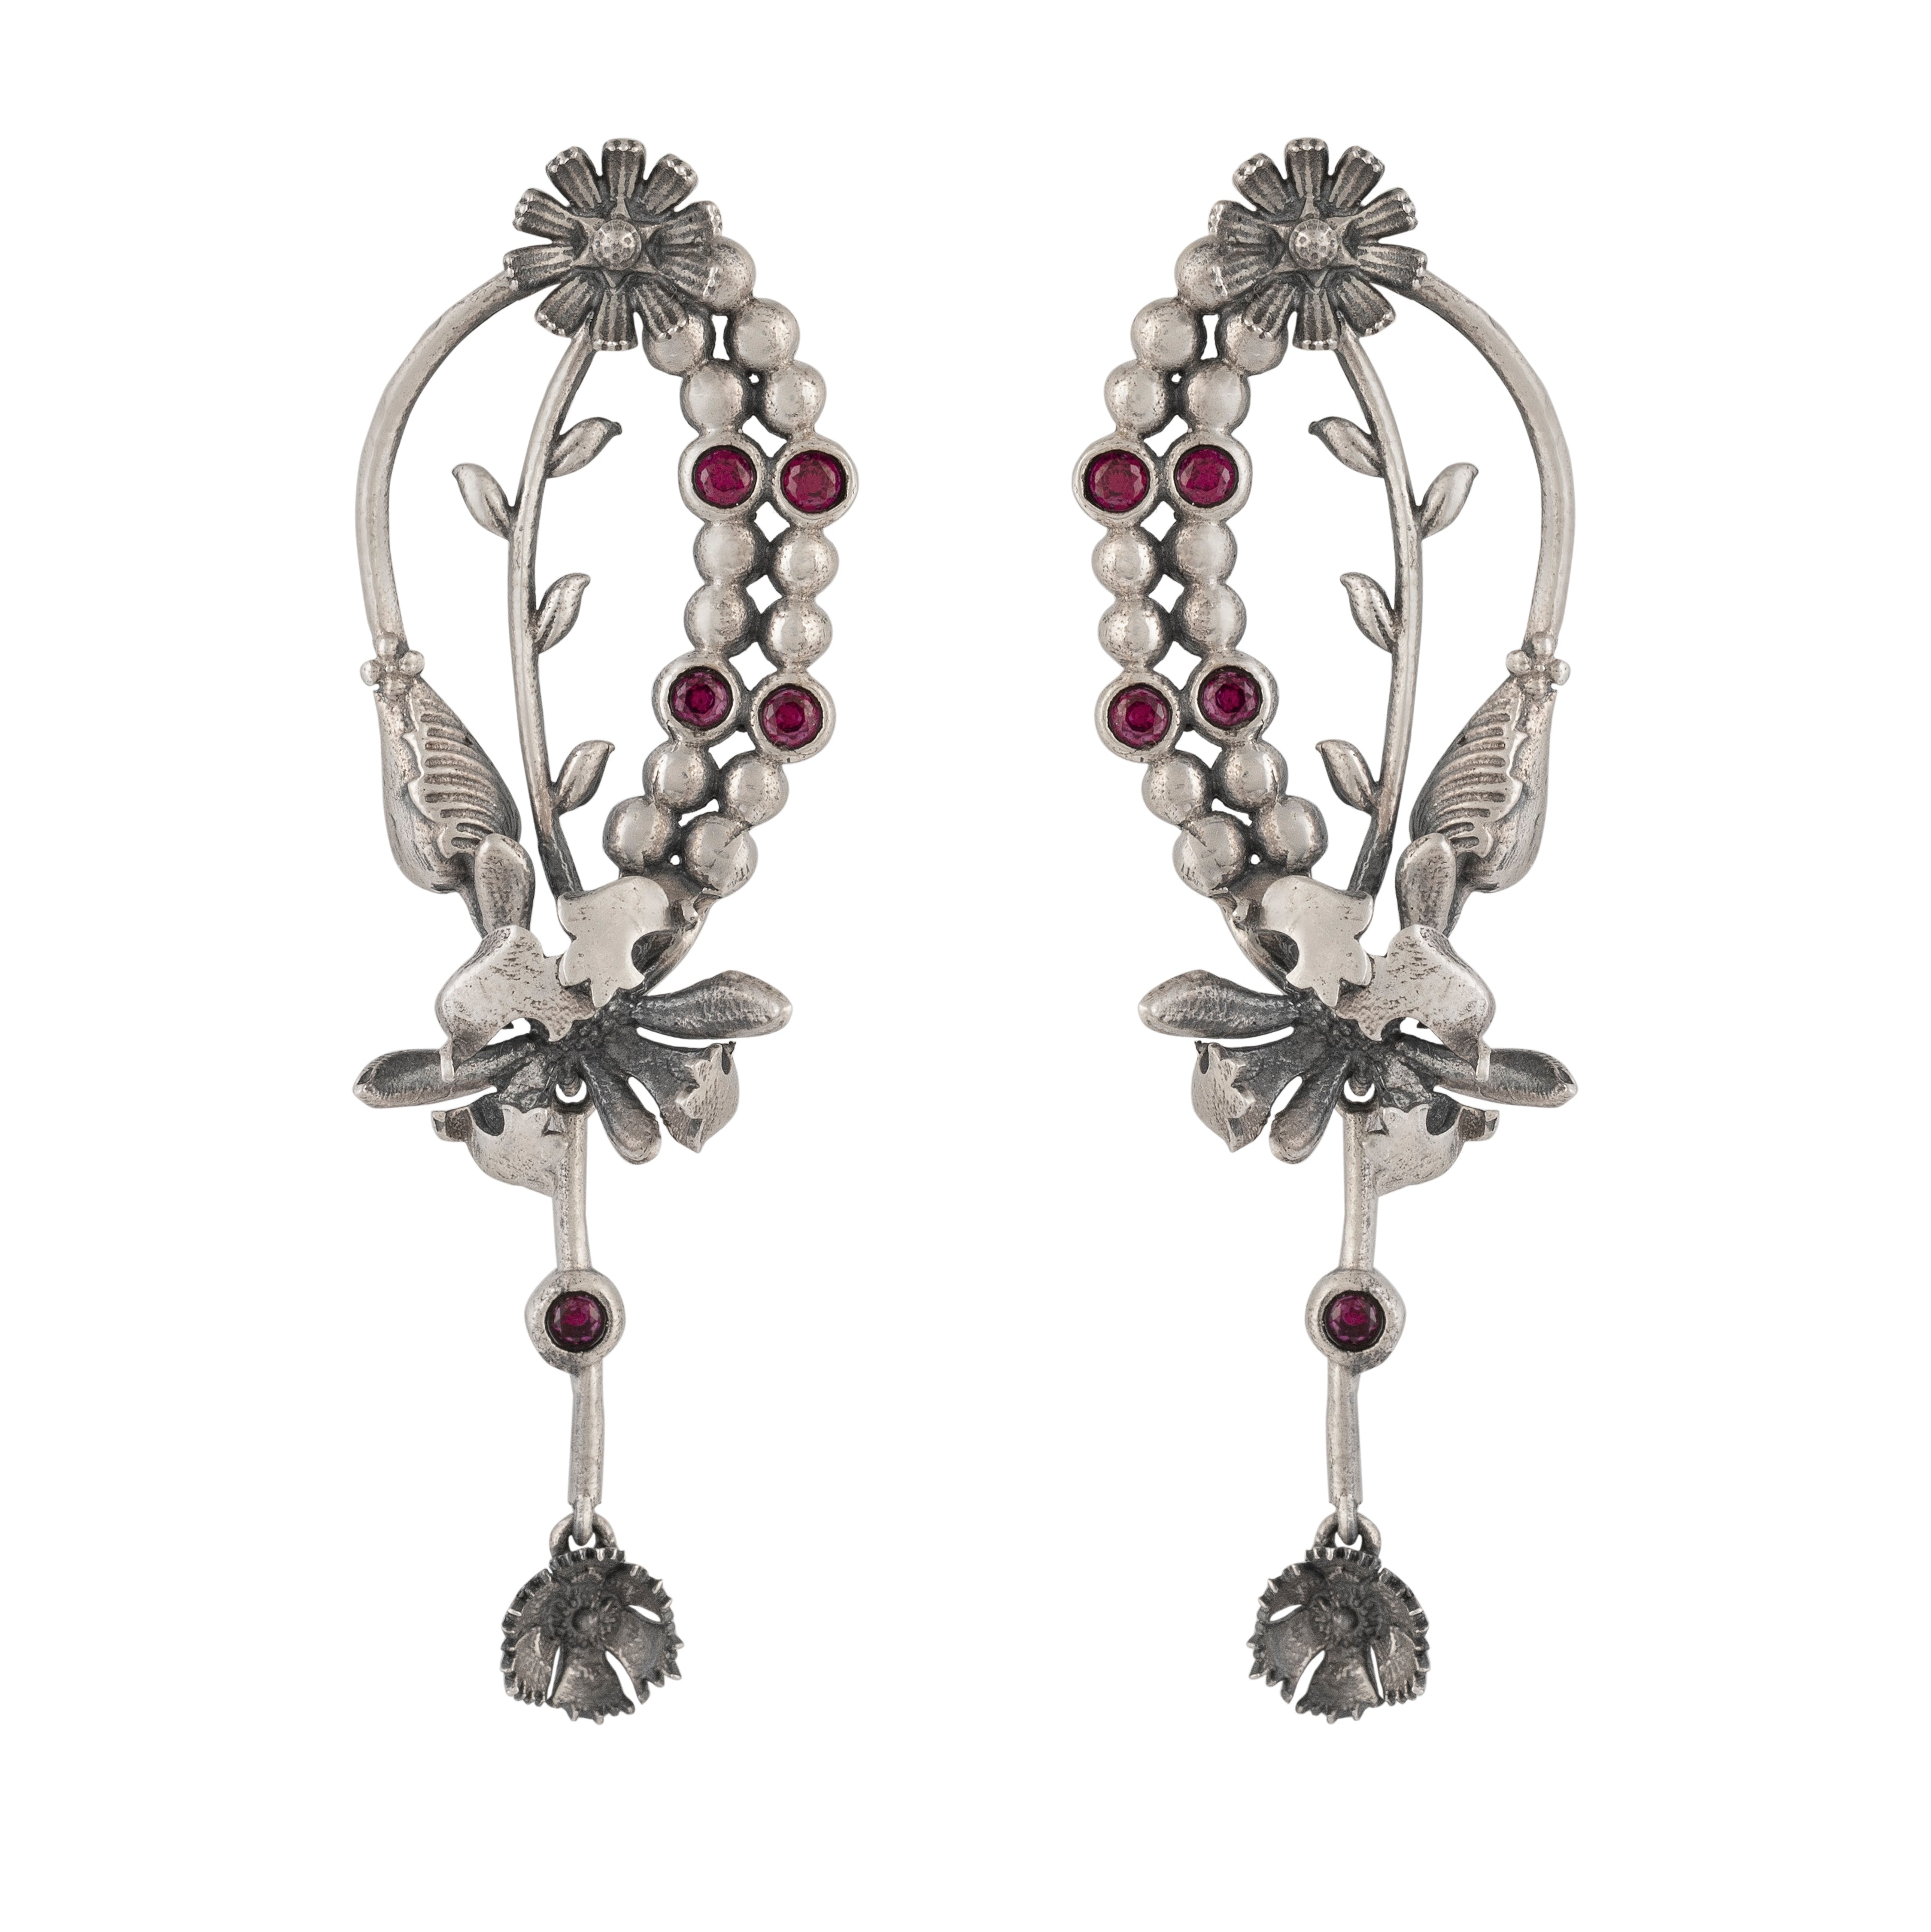 William Morris - Compton Buds Silver Dangling Earrings by Moha